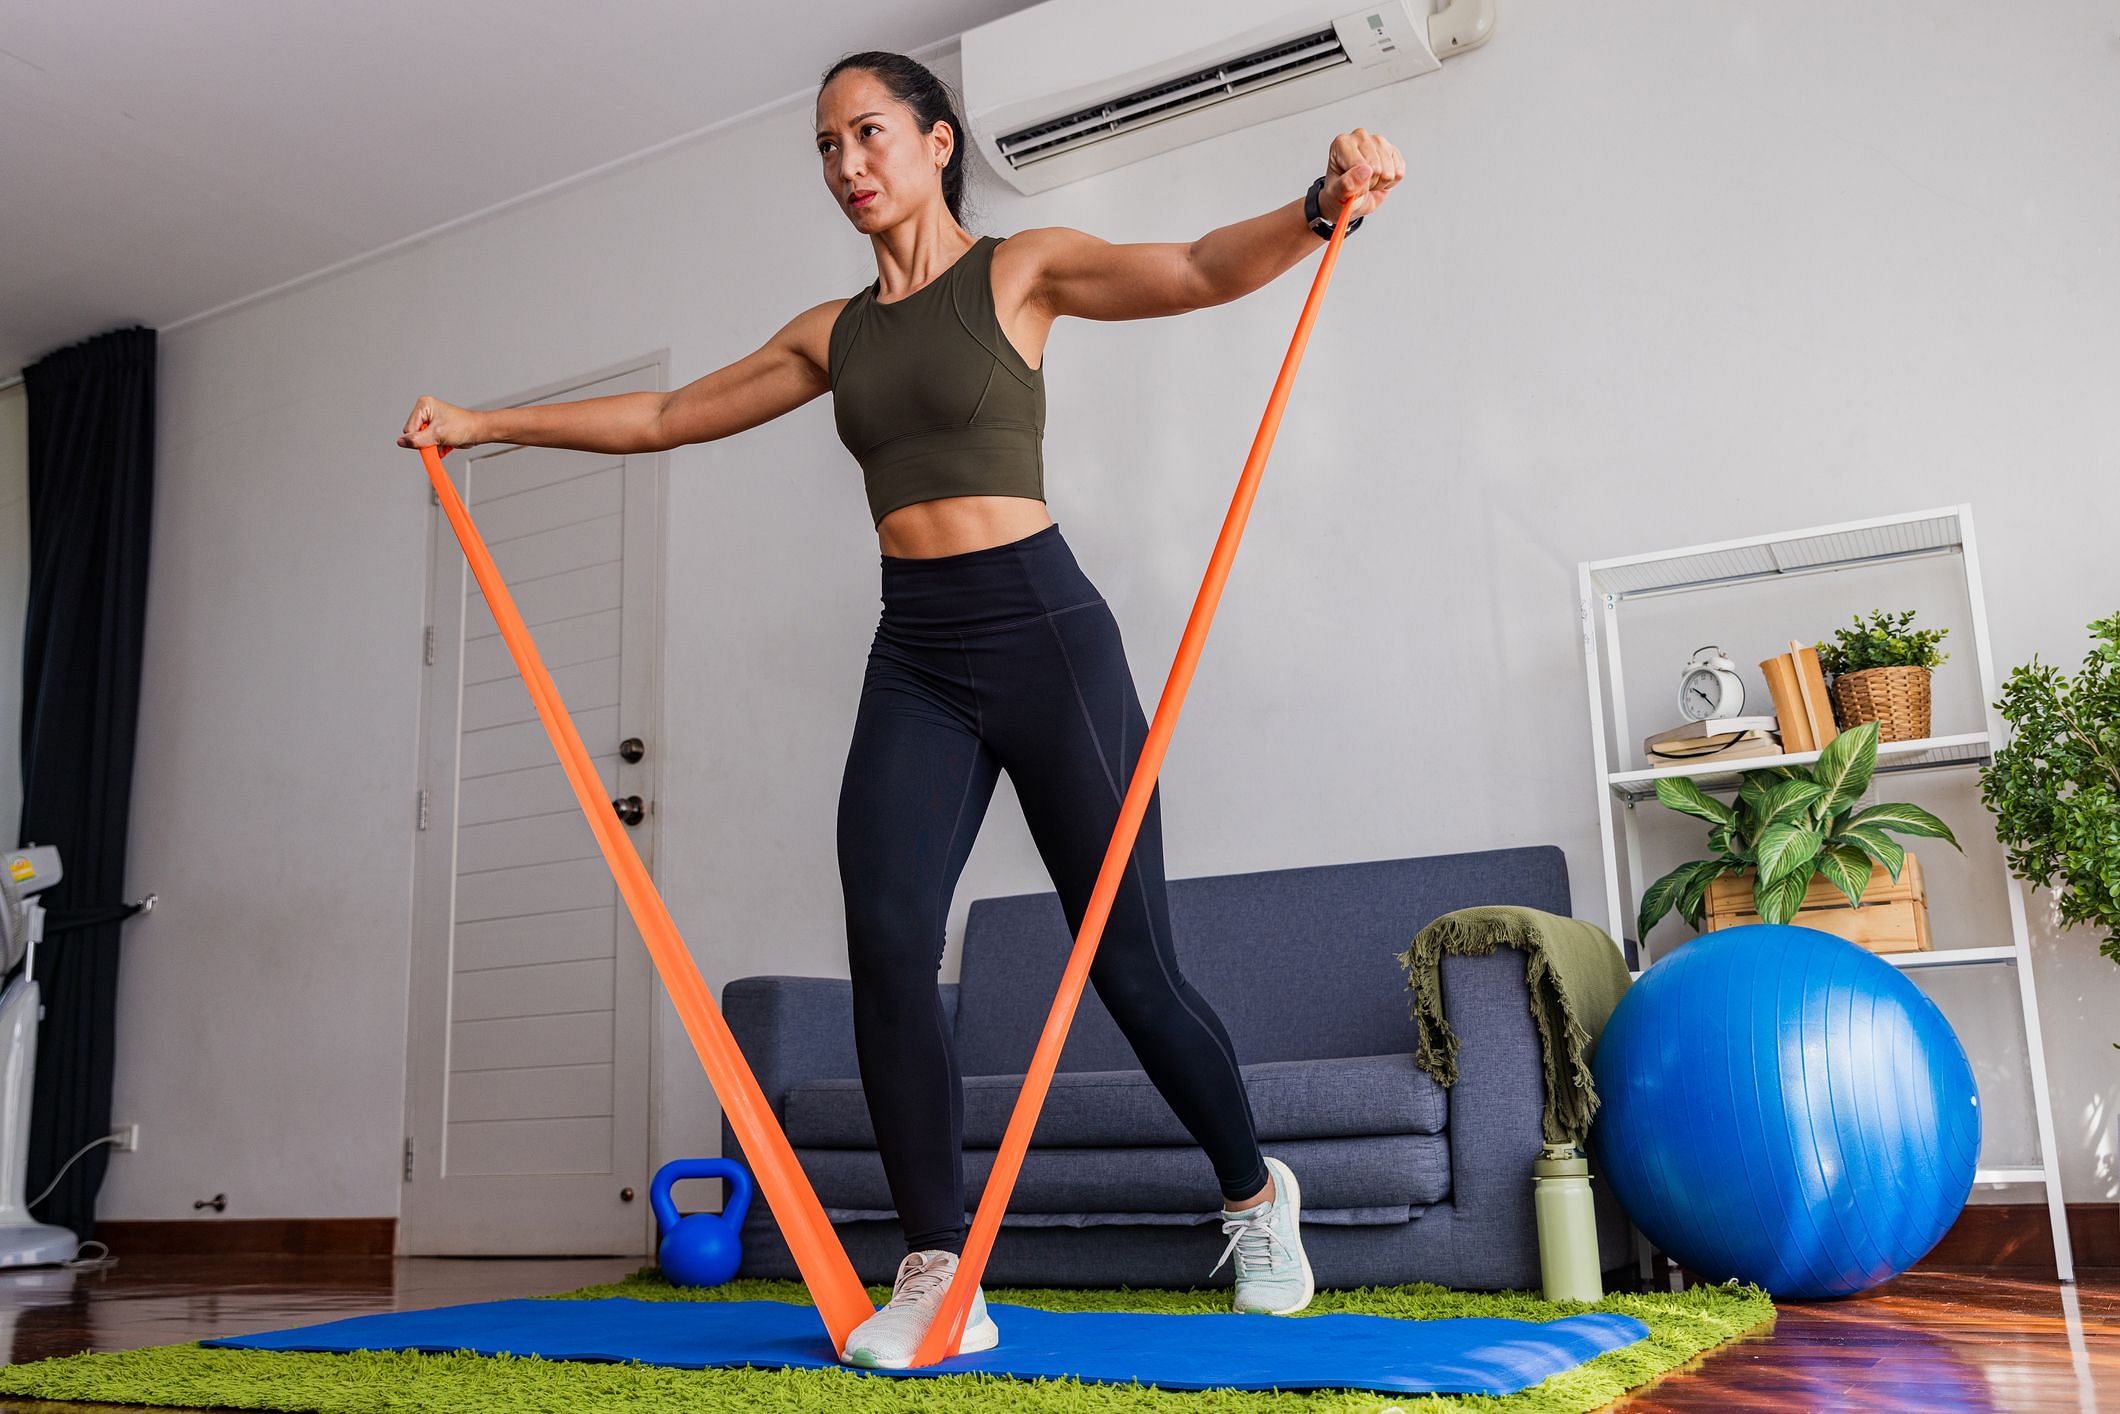 Low-Impact Exercise Equipment Purchasing Guide